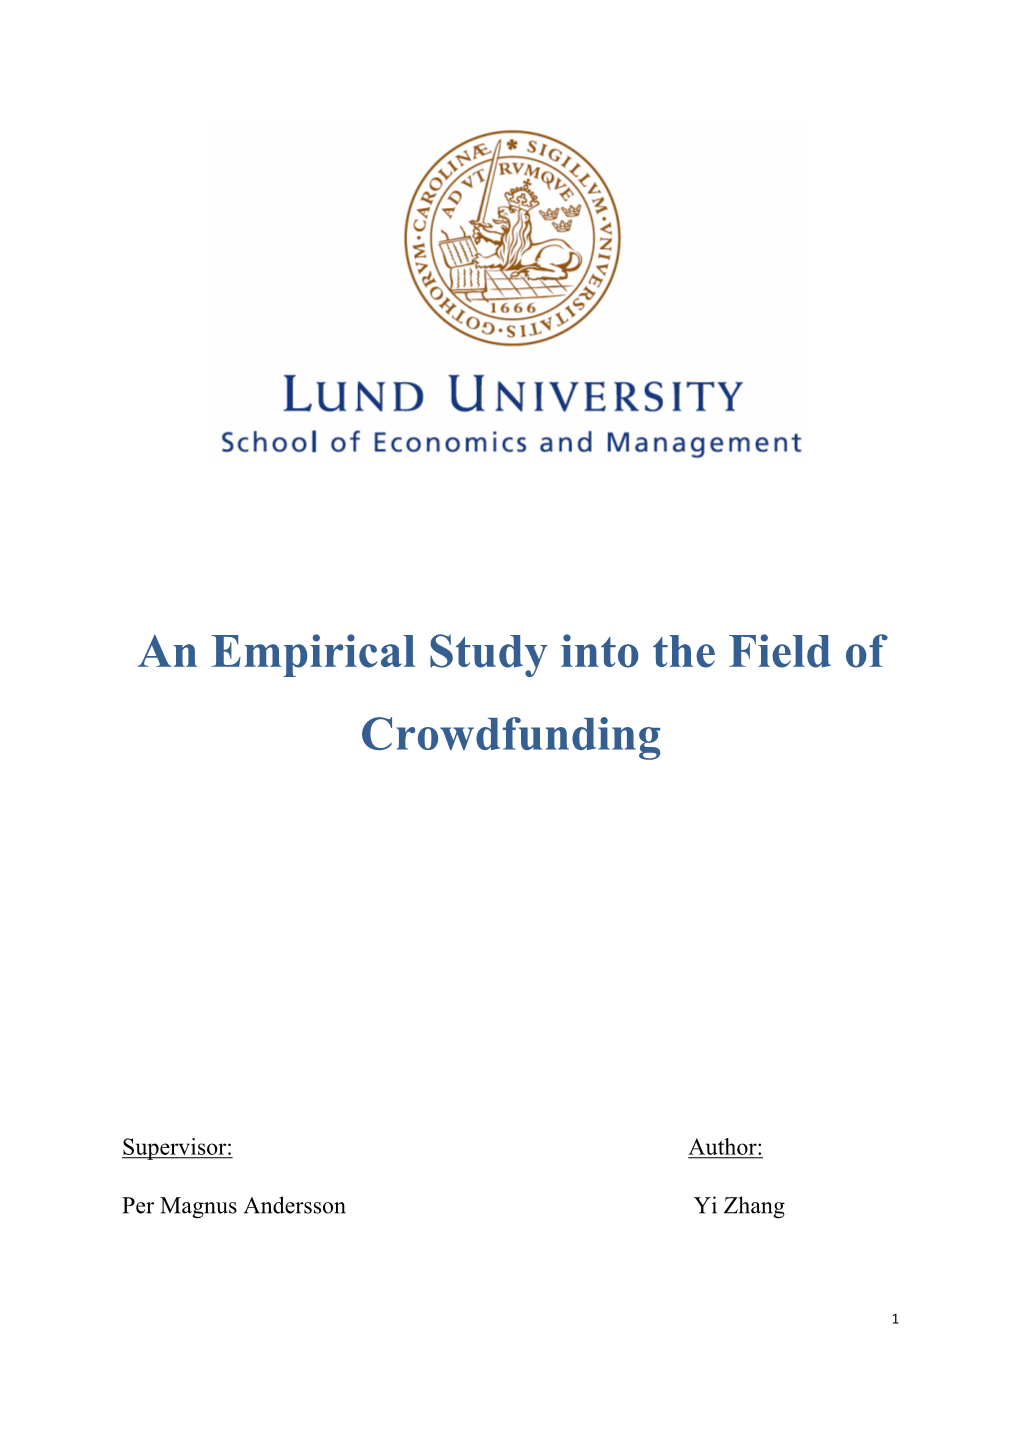 An Empirical Study Into the Field of Crowdfunding